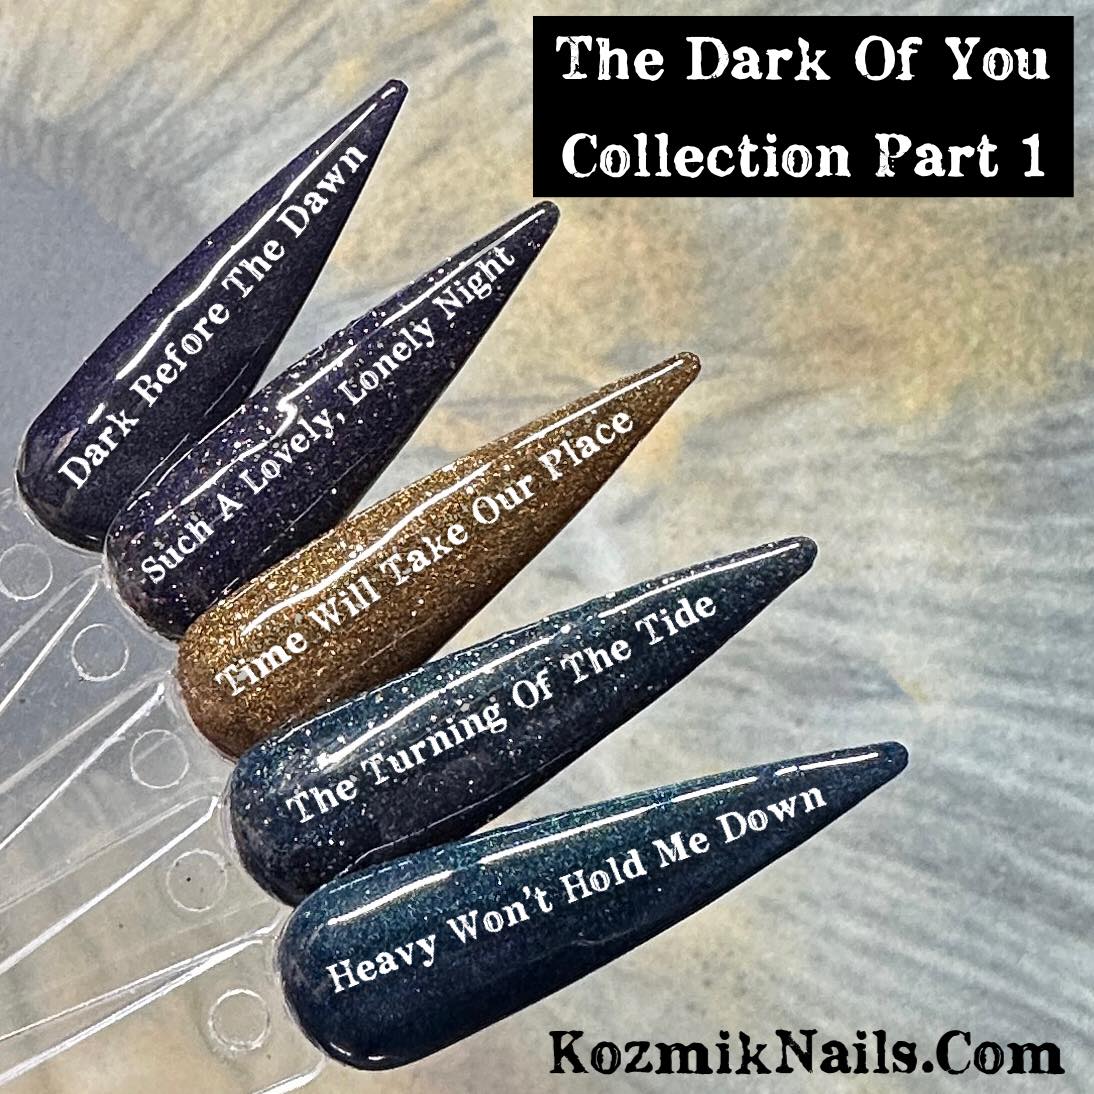 The Dark Of You Part 1